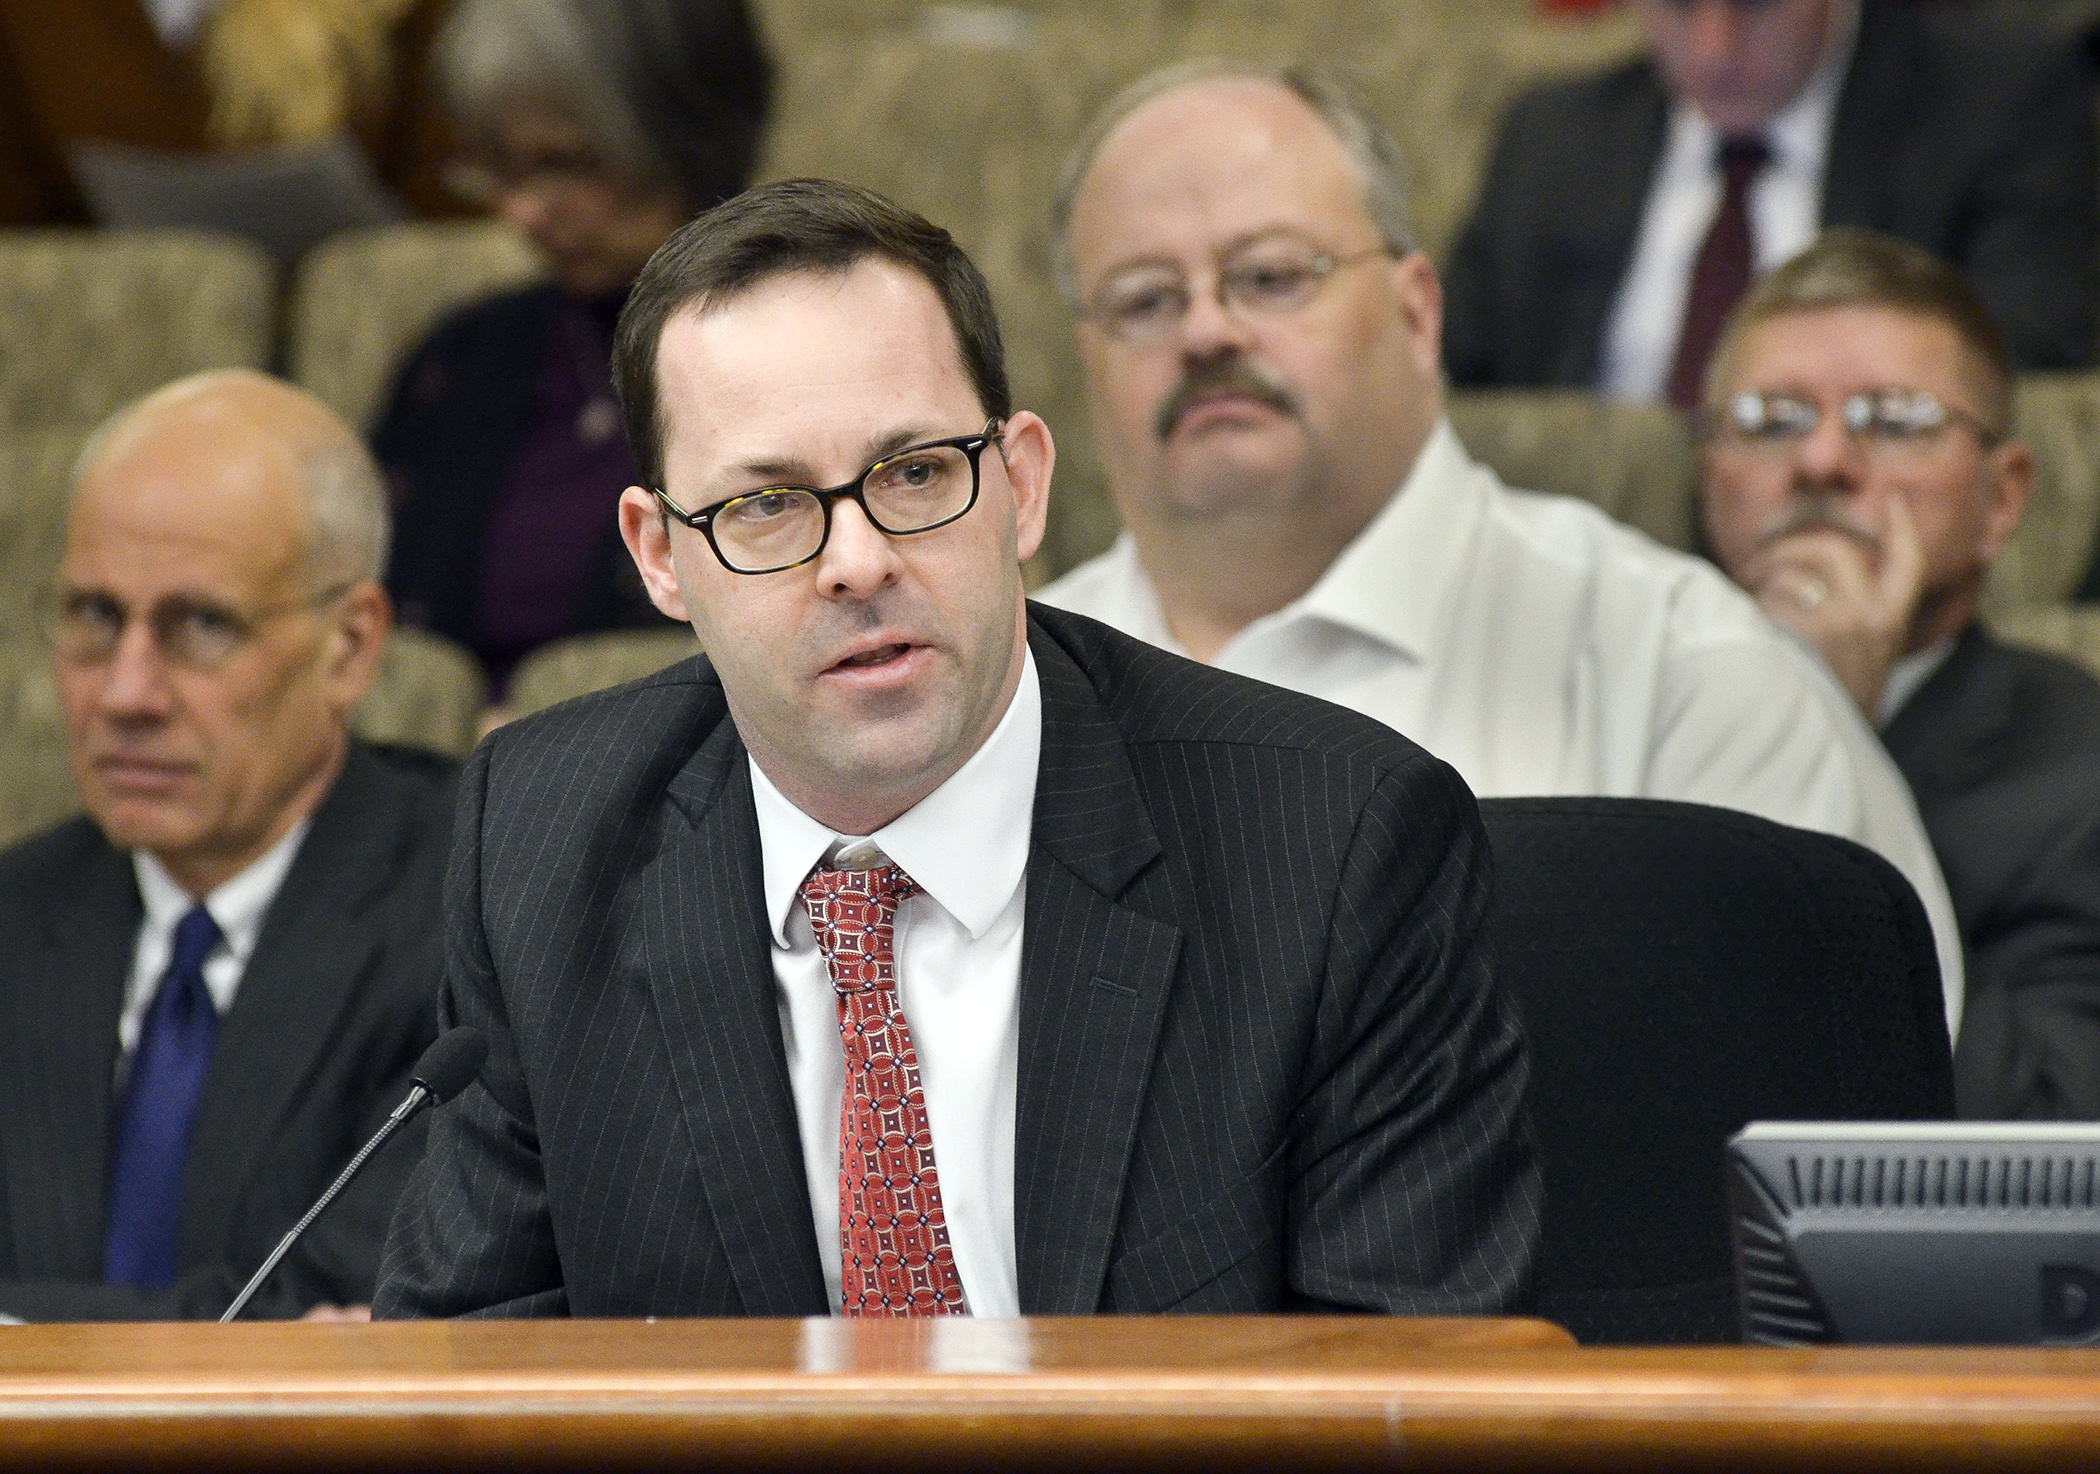 Will Phillips, state director of AARP Minnesota, testifies before the House Aging and Long-Term Care Policy Committee Feb. 25 in support of bills that would allow Social Security benefits subtraction from income taxes. Photo by Andrew VonBank